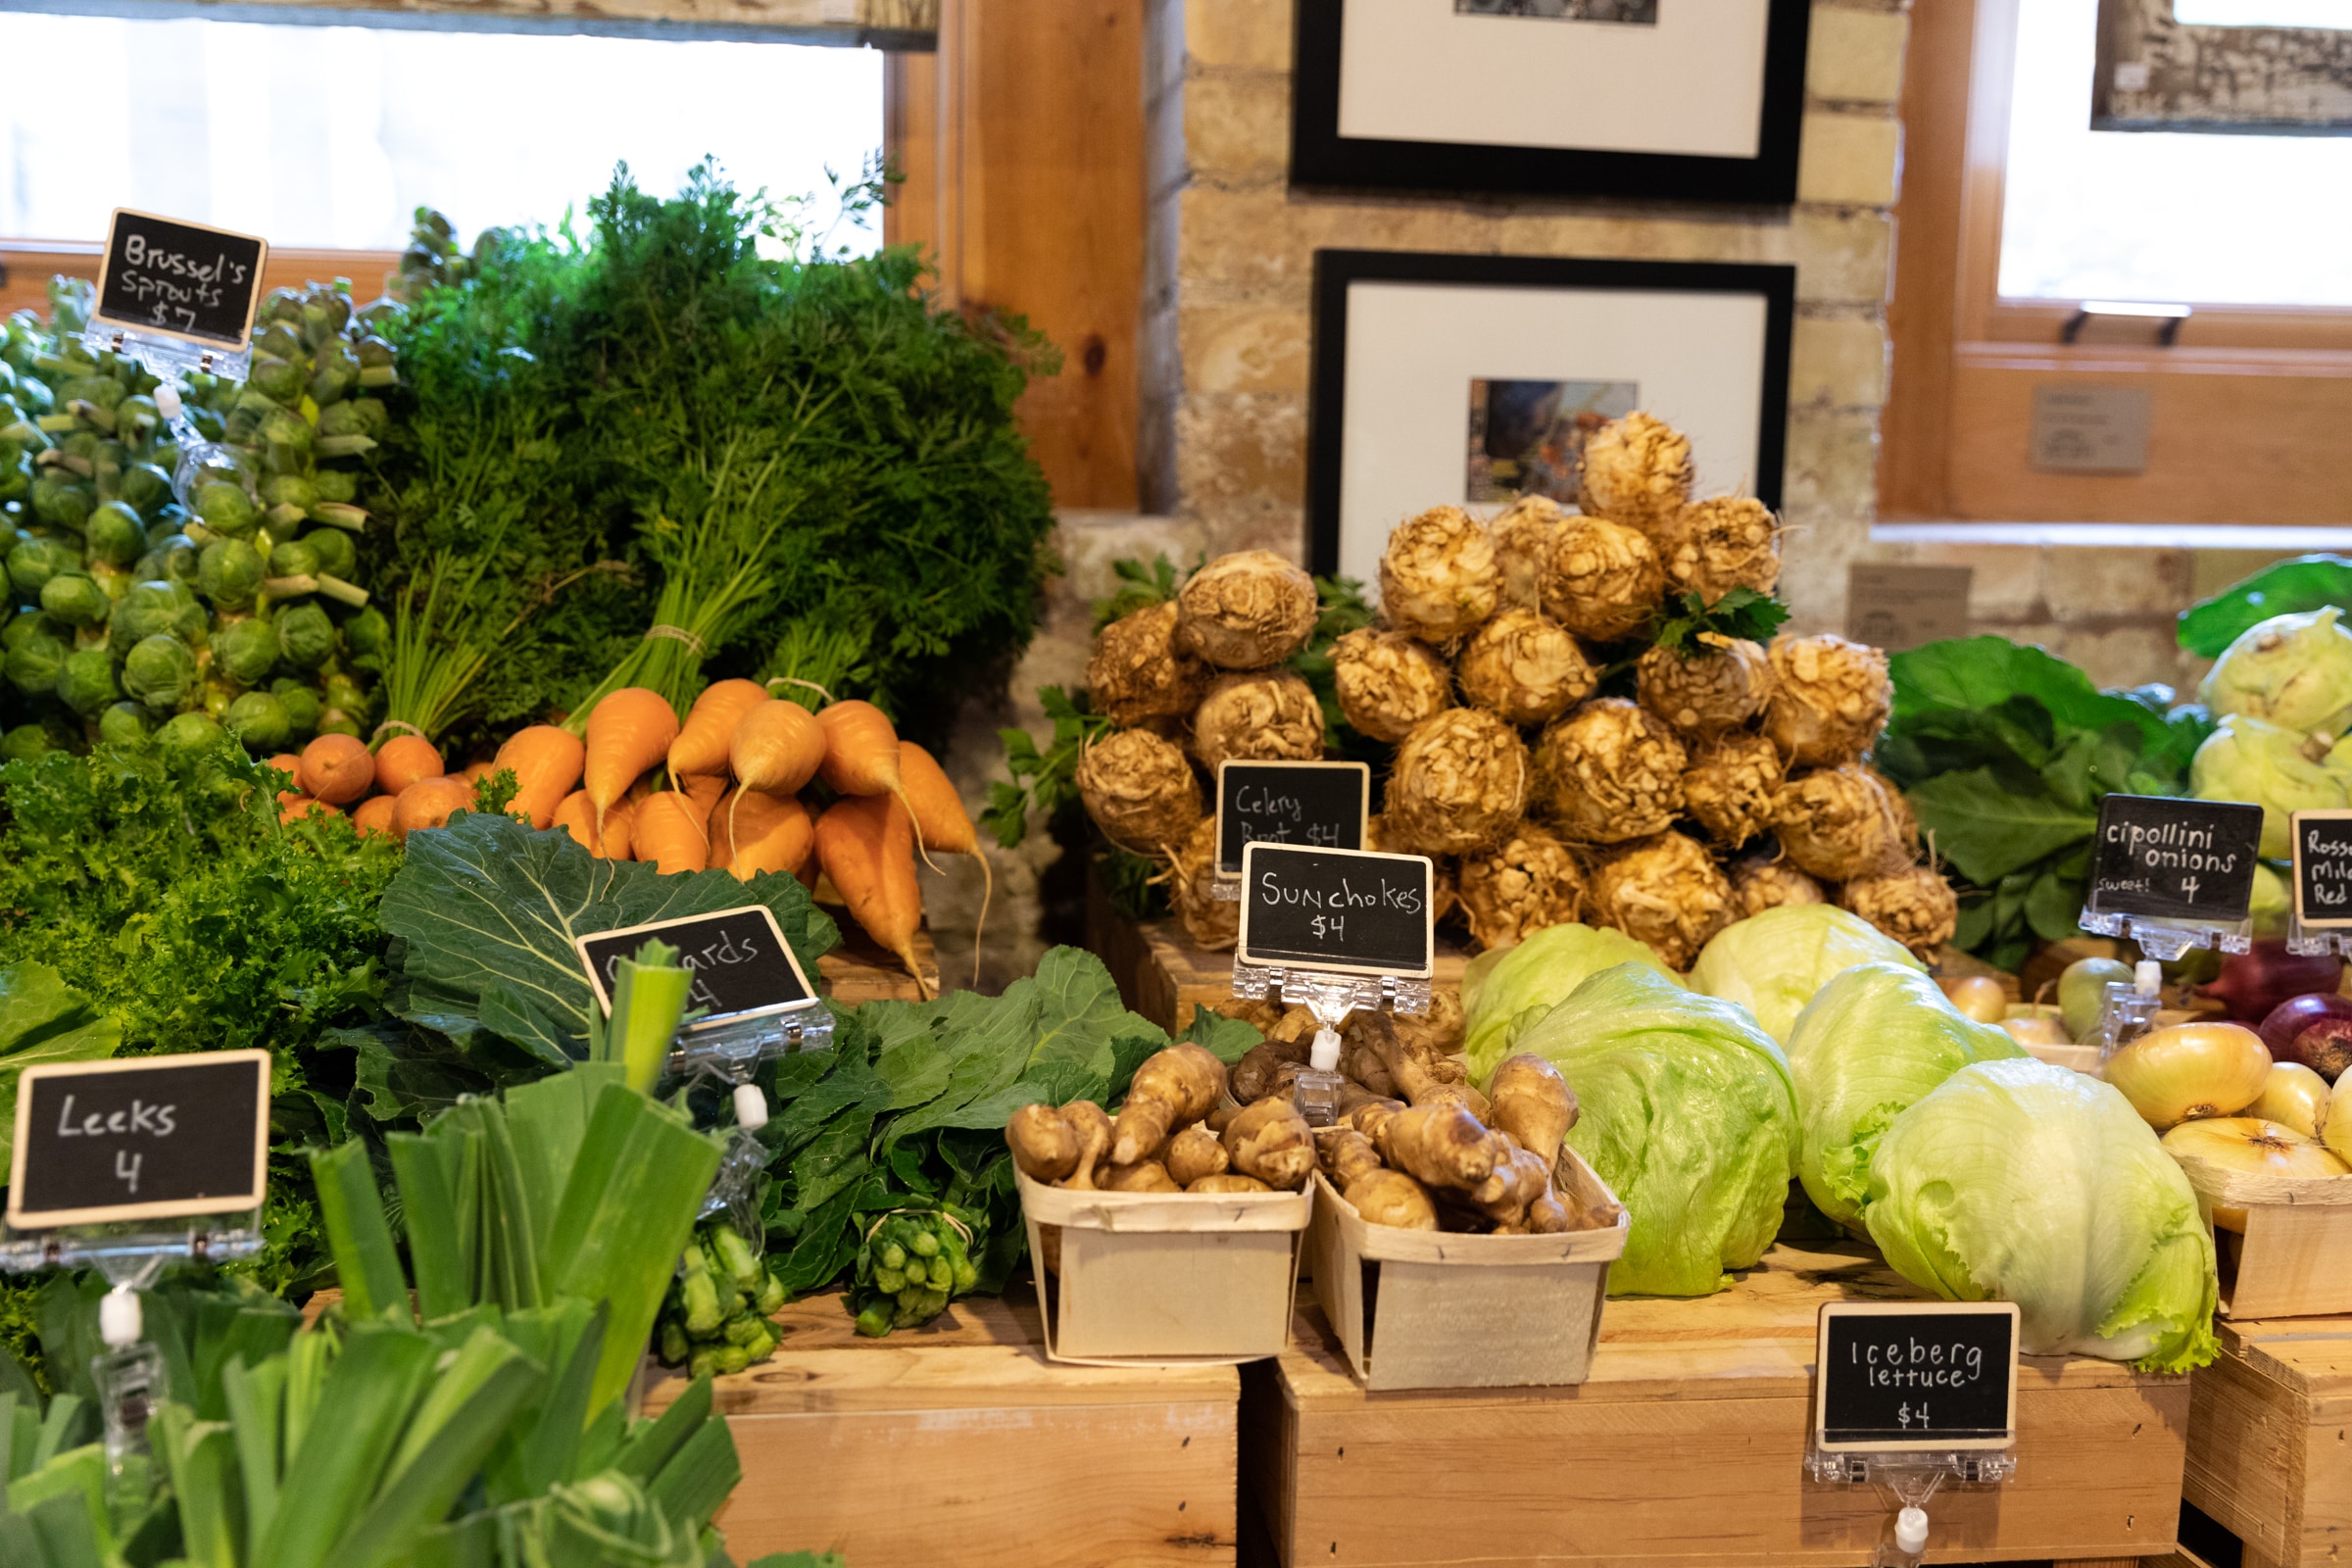 5 Ways to Prep your Farm Market Trip for the Holidays